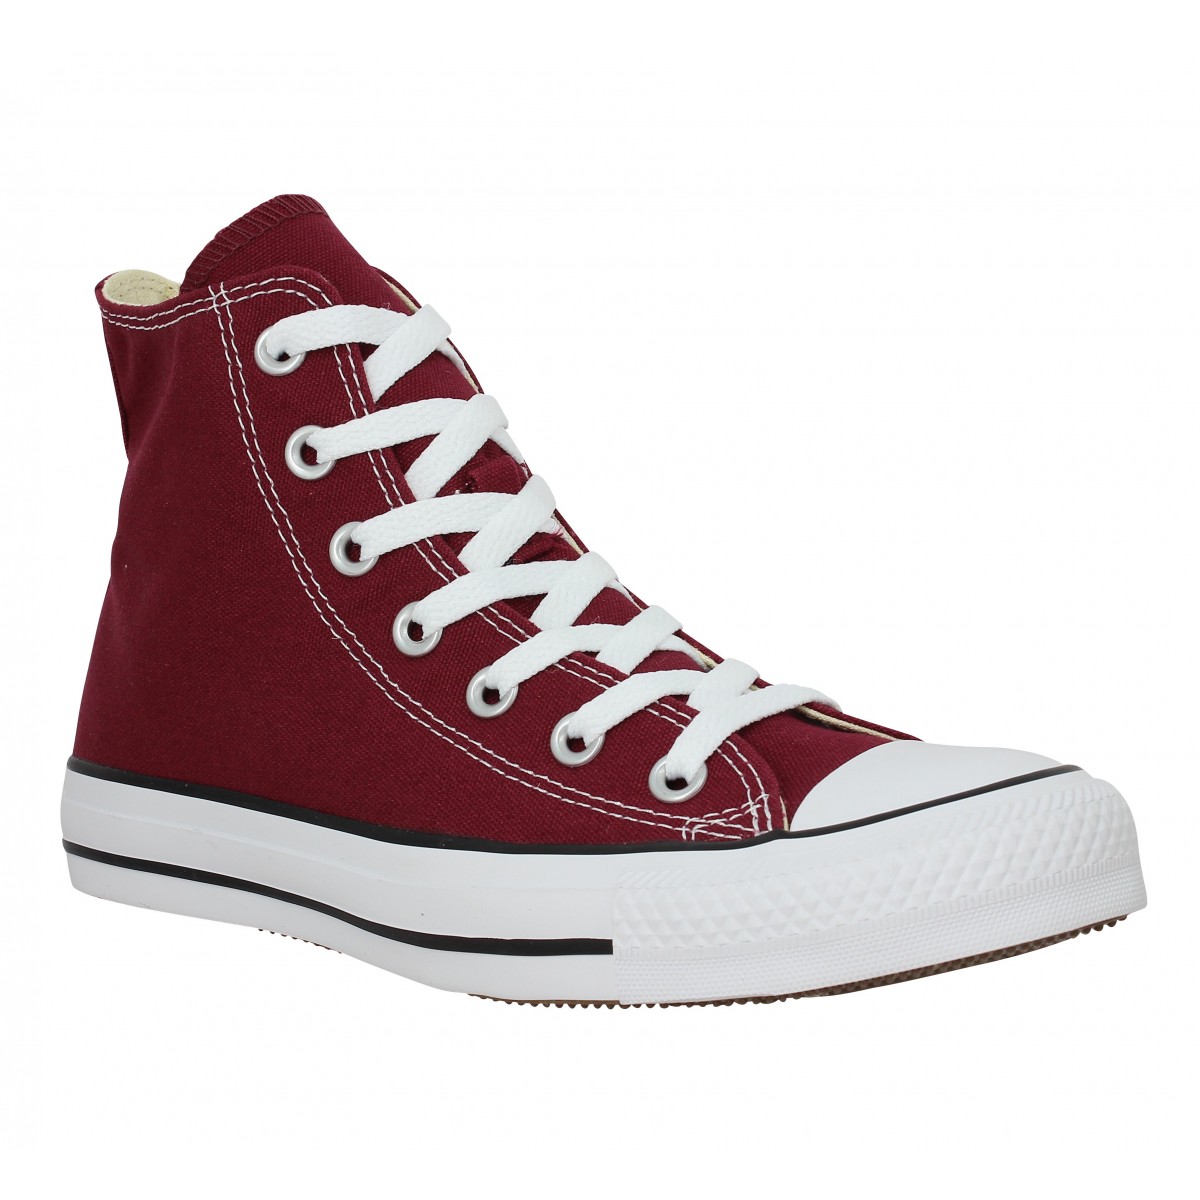 Chaussures Converse chuck taylor all star hi toile homme bordeaux ...